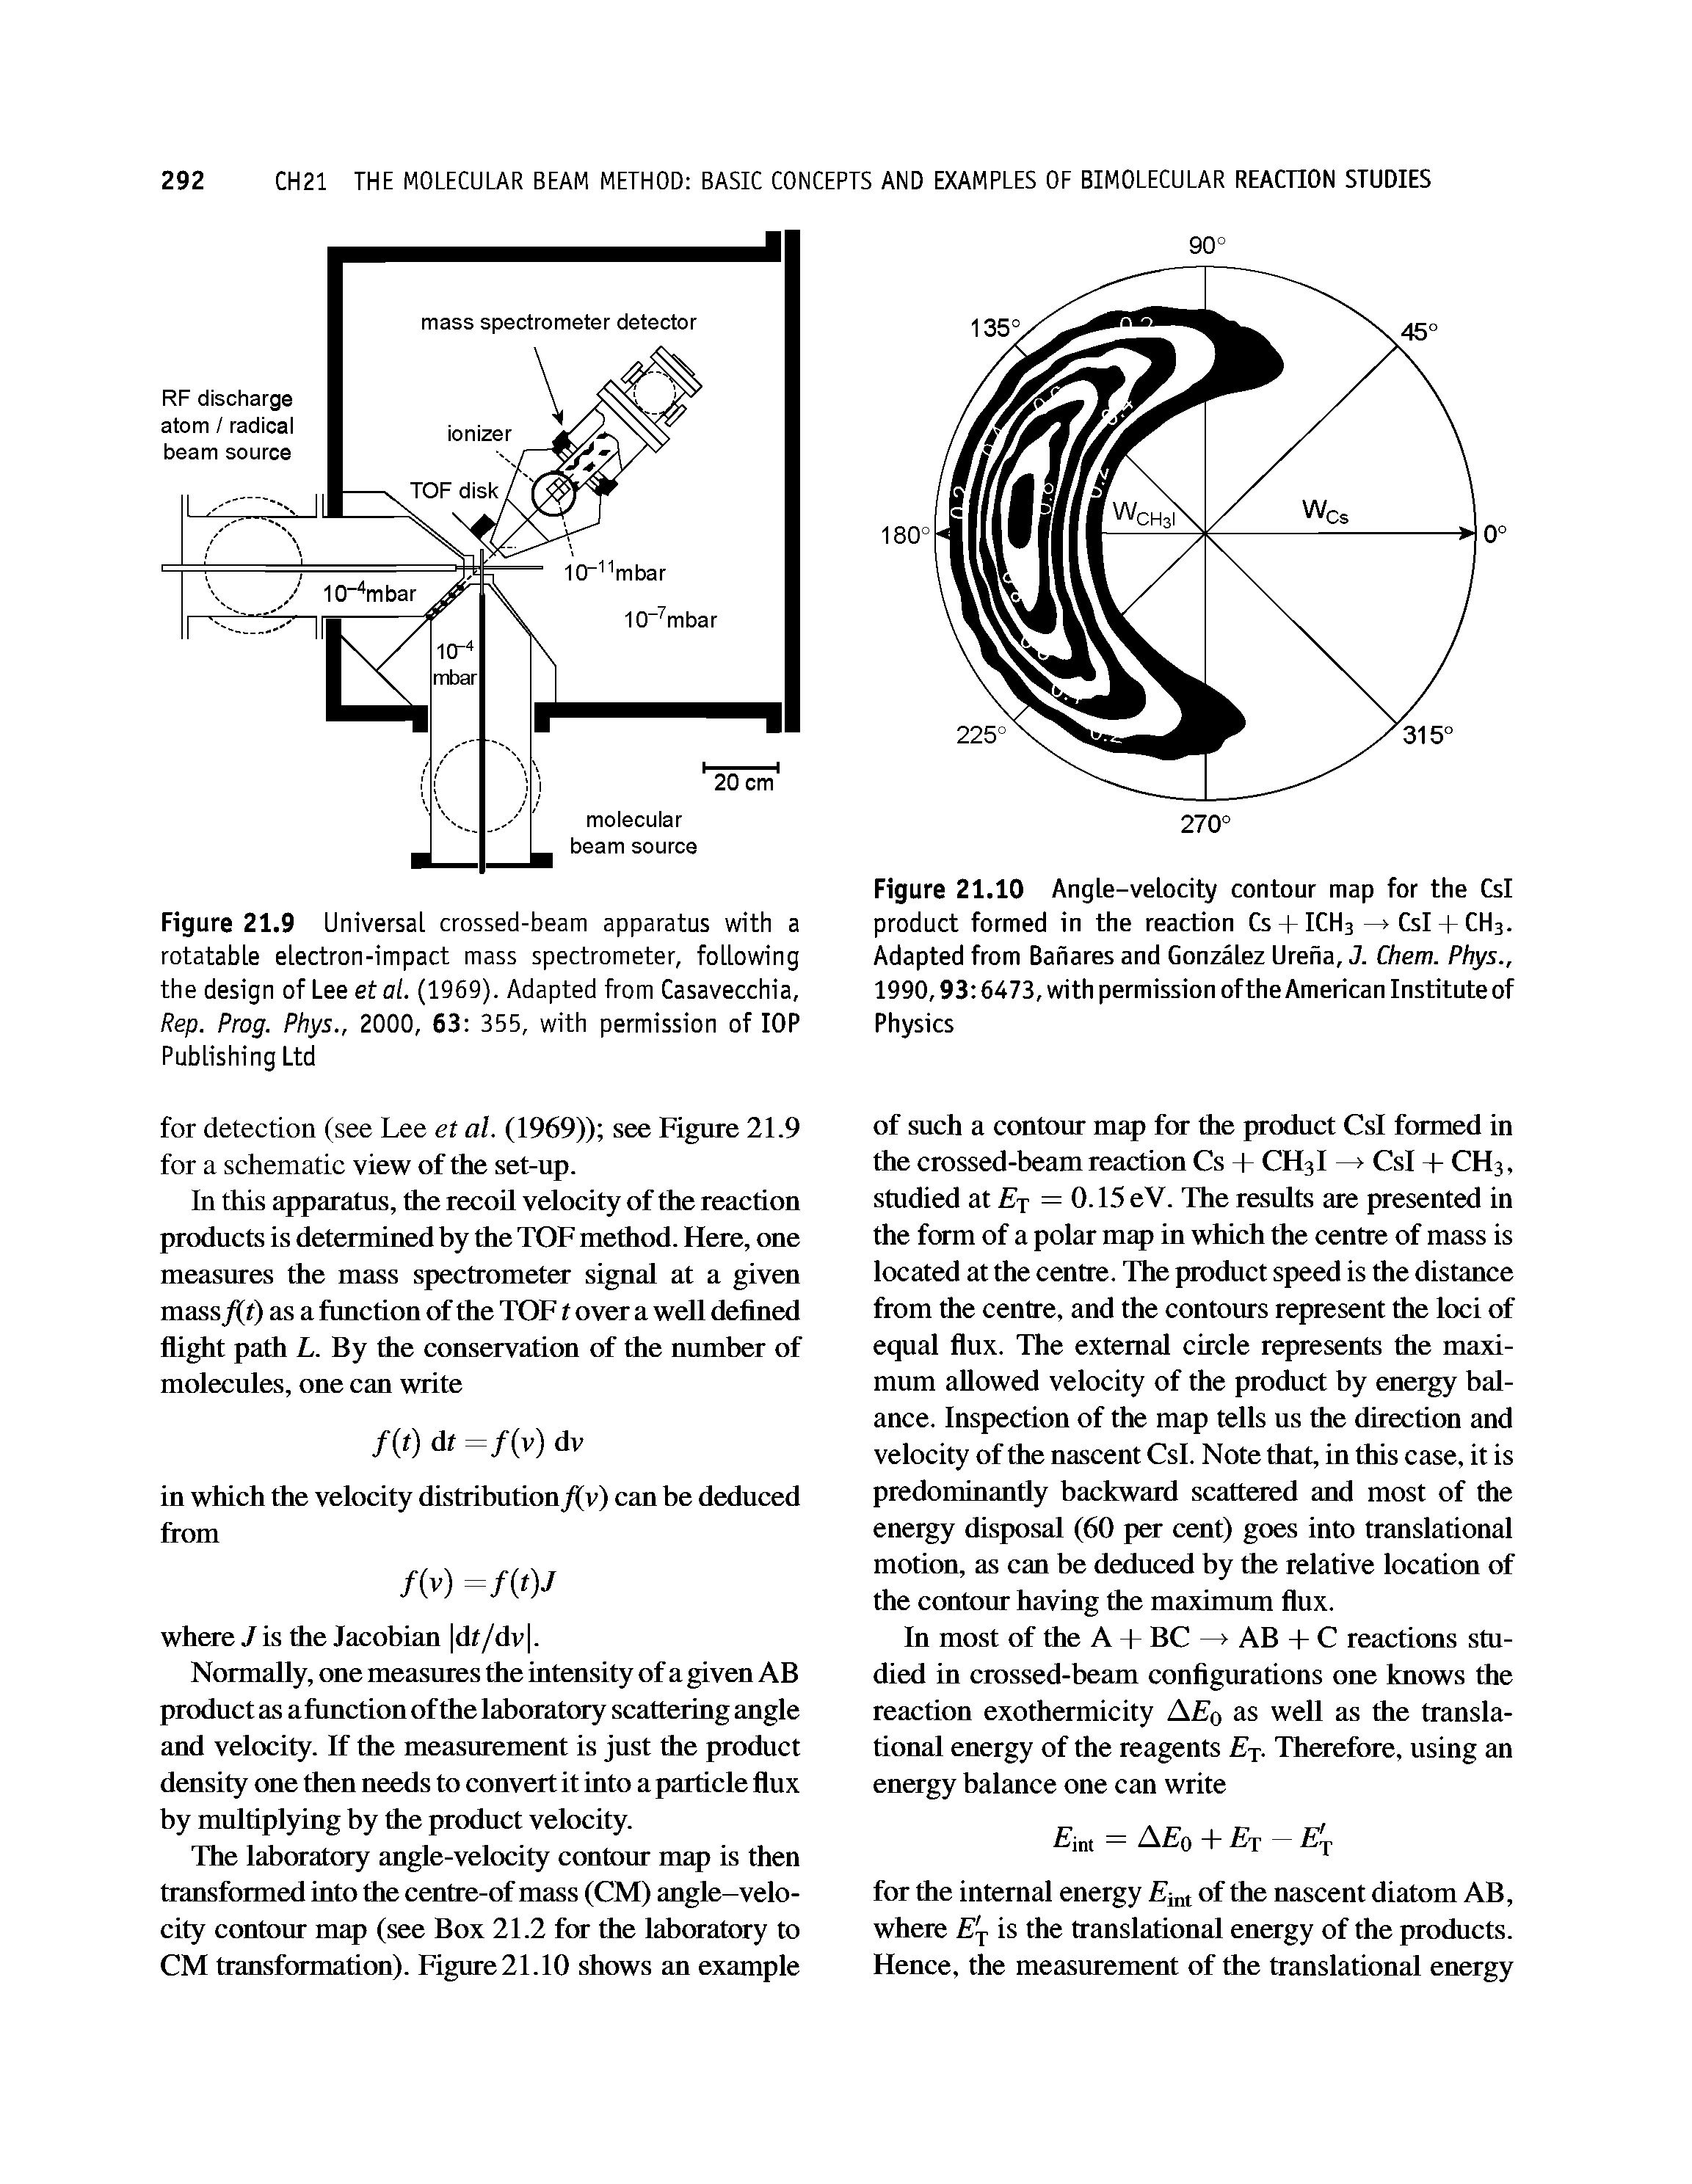 Figure 21,9 Universal crossed-beam apparatus with a rotatable electron-impact mass spectrometer, following the design of Lee et al. (1969). Adapted from Casavecchia, Rep. Prog. Phys., 2000, 63 355, with permission of lOP...